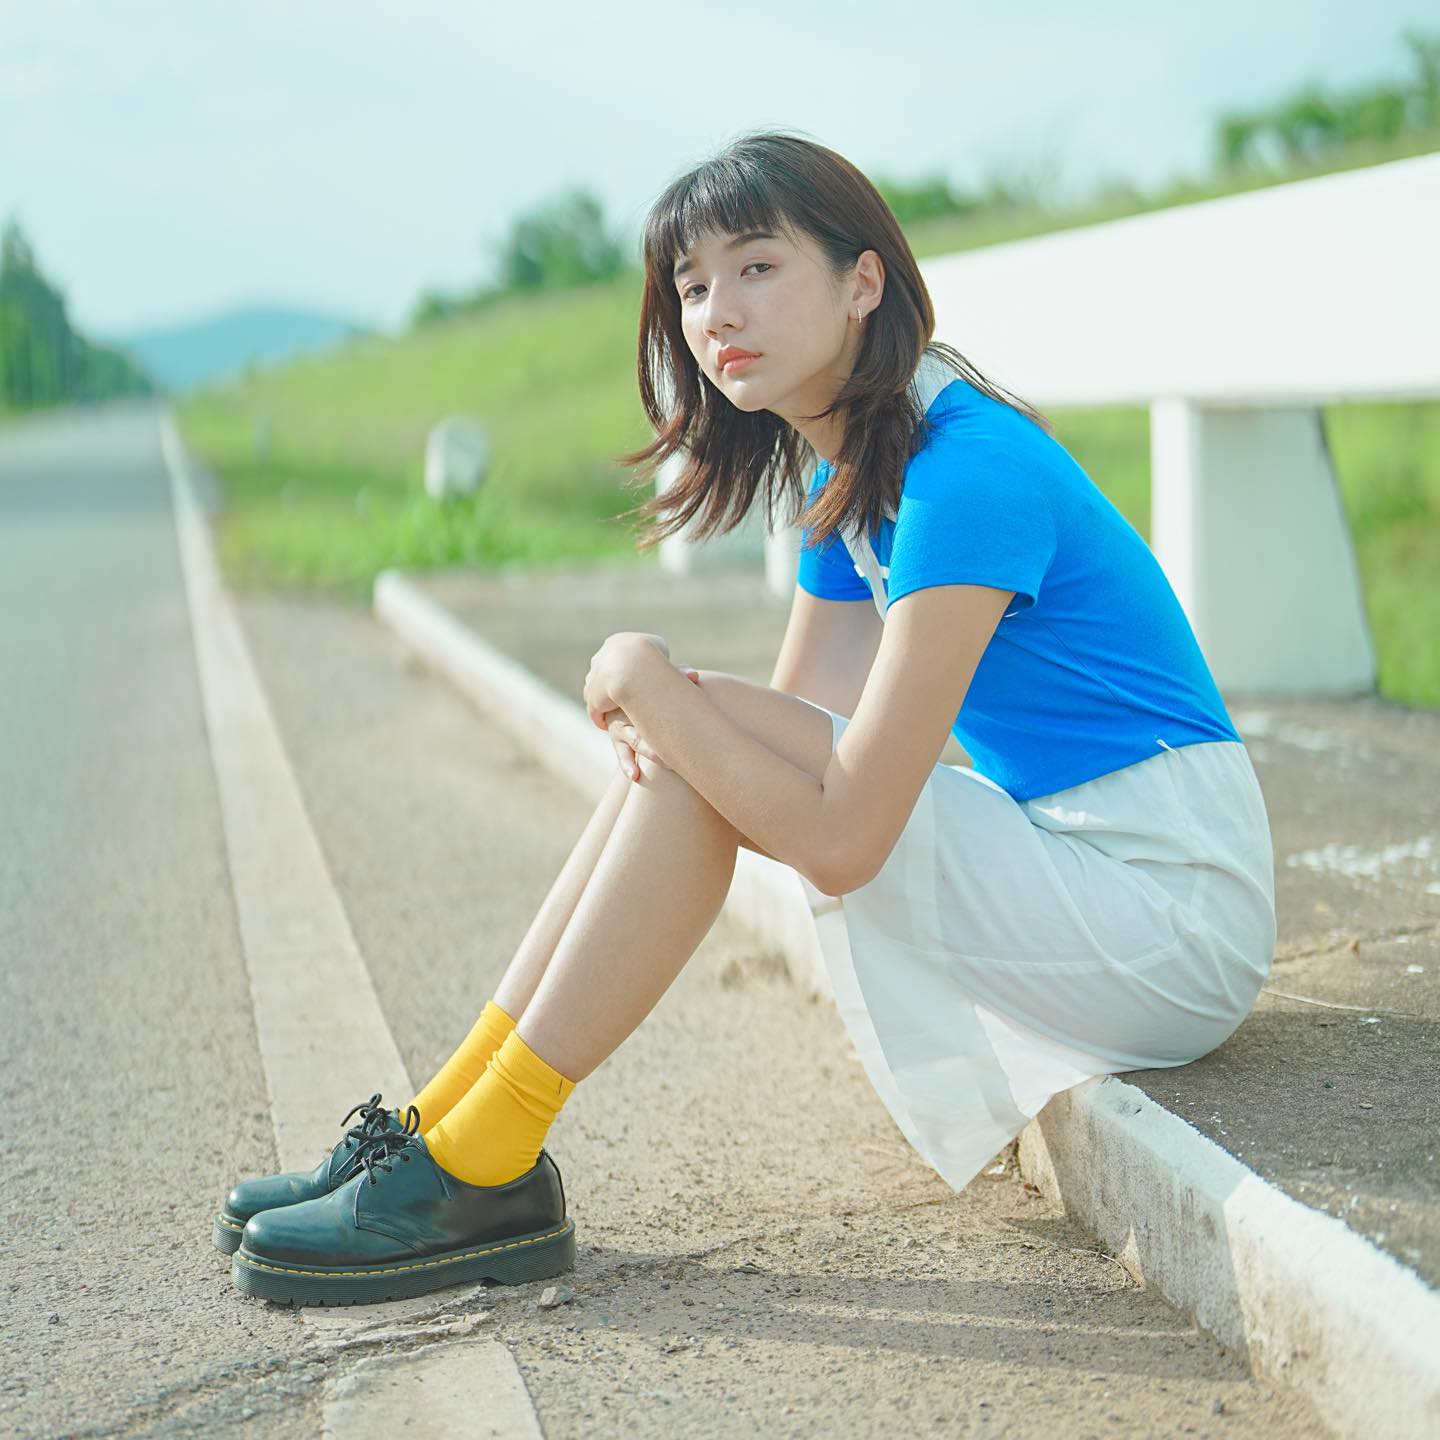 Girl in a bright blue top sitting by the kerb side along an empty road, with her arms over her knees